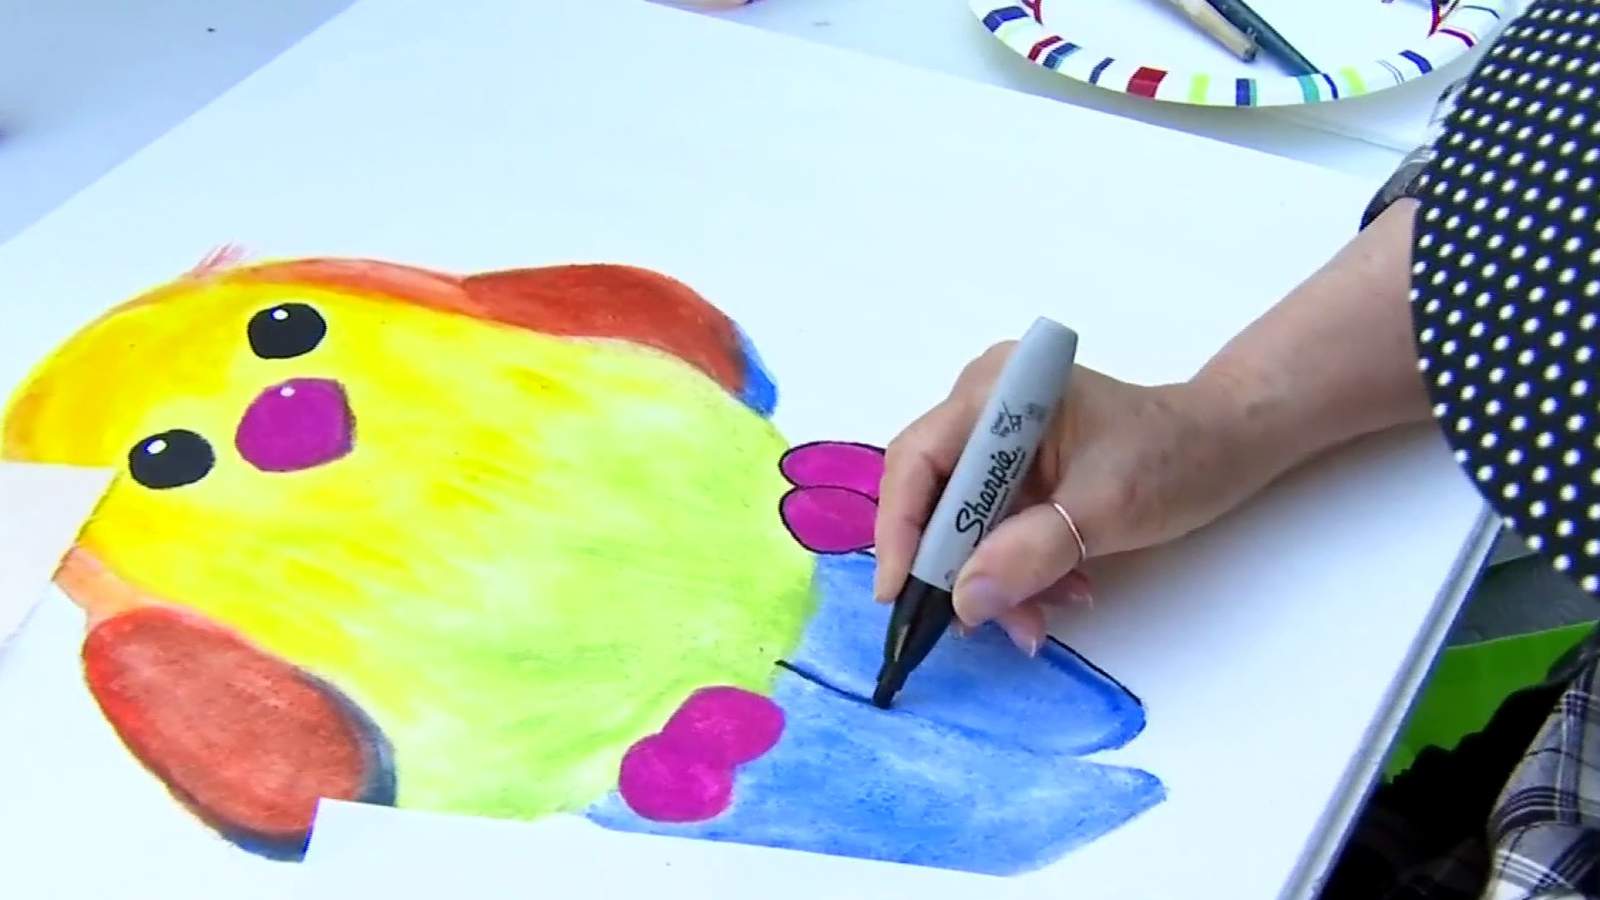 Roanoke retirees using art to bring smilies to kids at Carilion